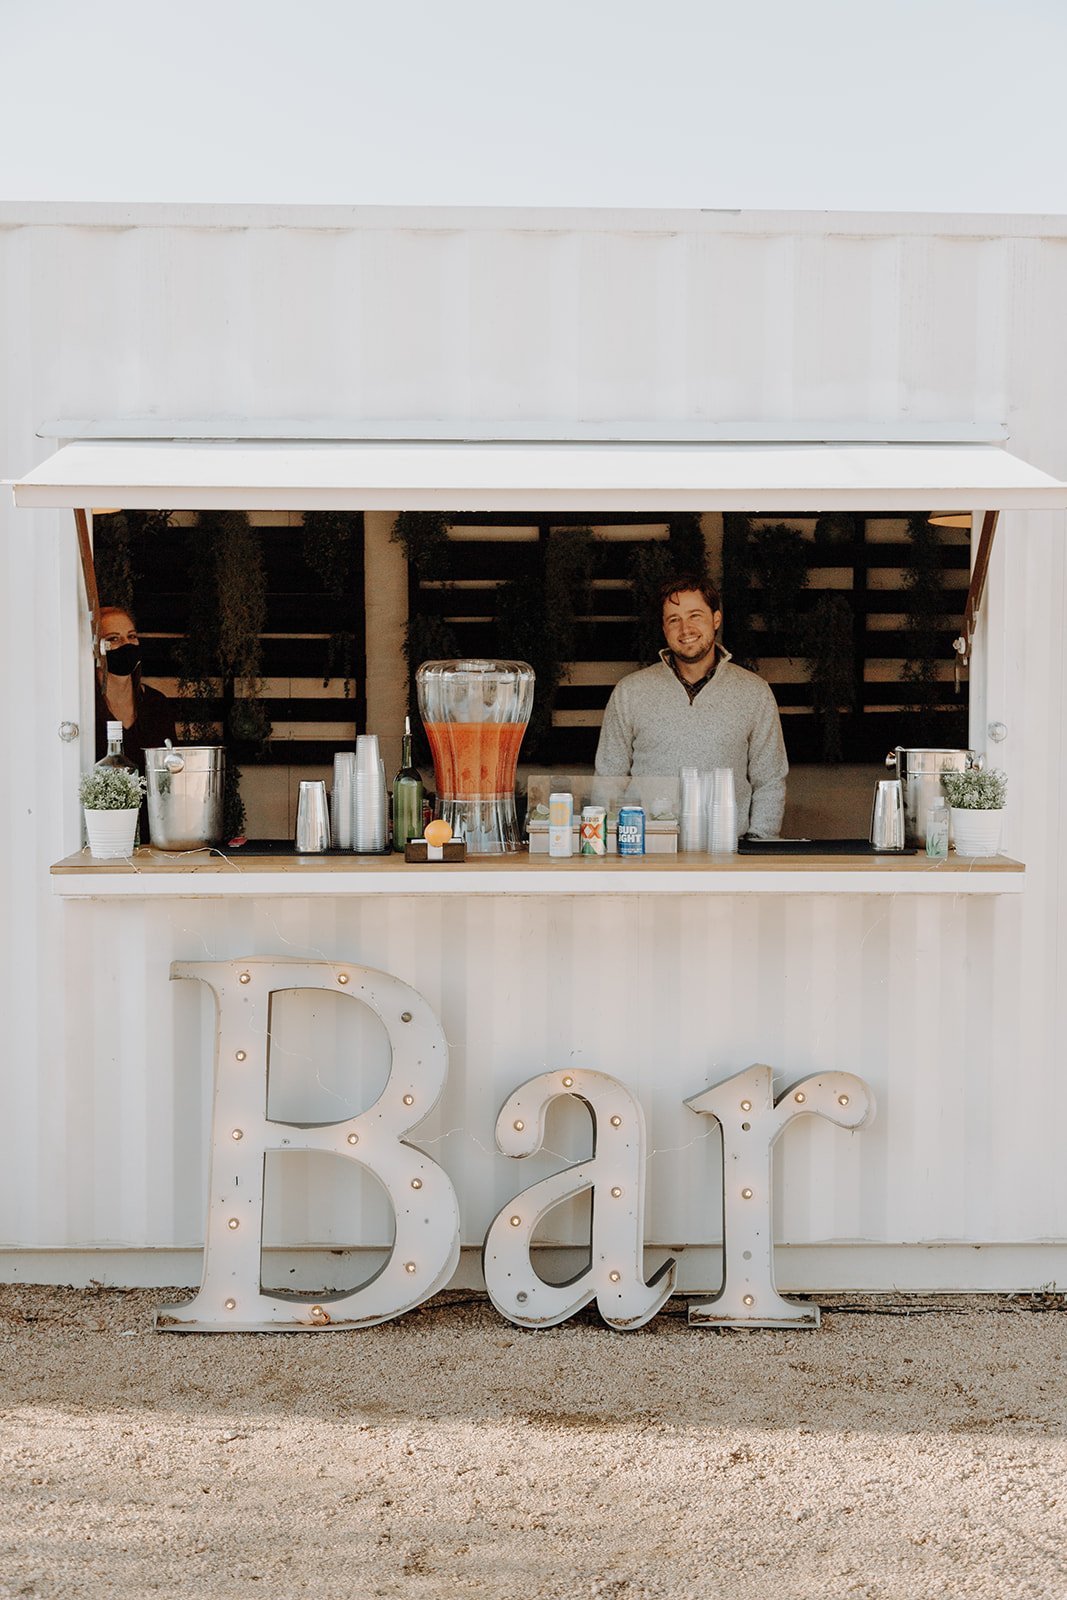 Outdoor bar at the Ice Plant Bldg in Austin, Texas